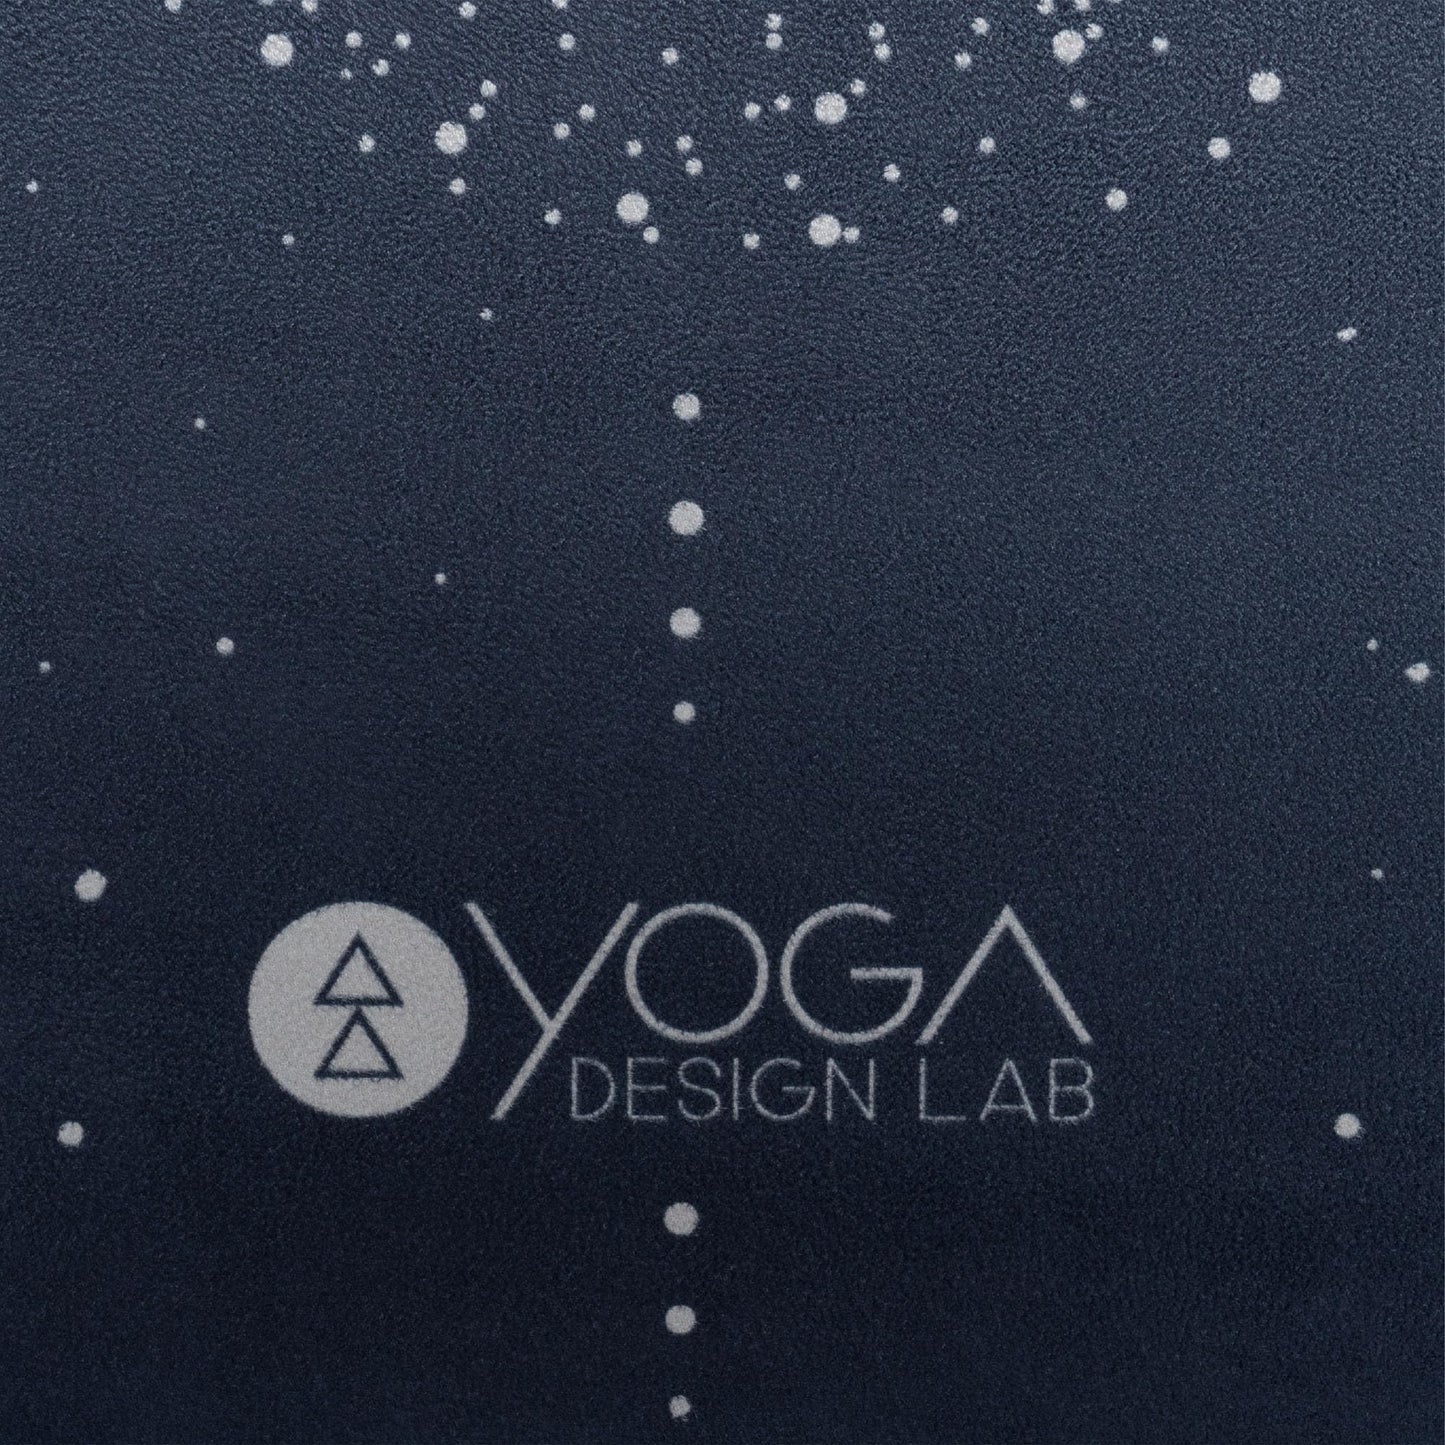 YOGA DESIGN LAB | The Kids Glow in the Dark Yoga Mat | Eco-Friendly + Supportive + Colorful Childrens Play Mat | Non Toxic | Ideal for Yoga, Gymnastics, Exercise, Athletics | Includes Carrying Strap! (Celestial, 4 mm)